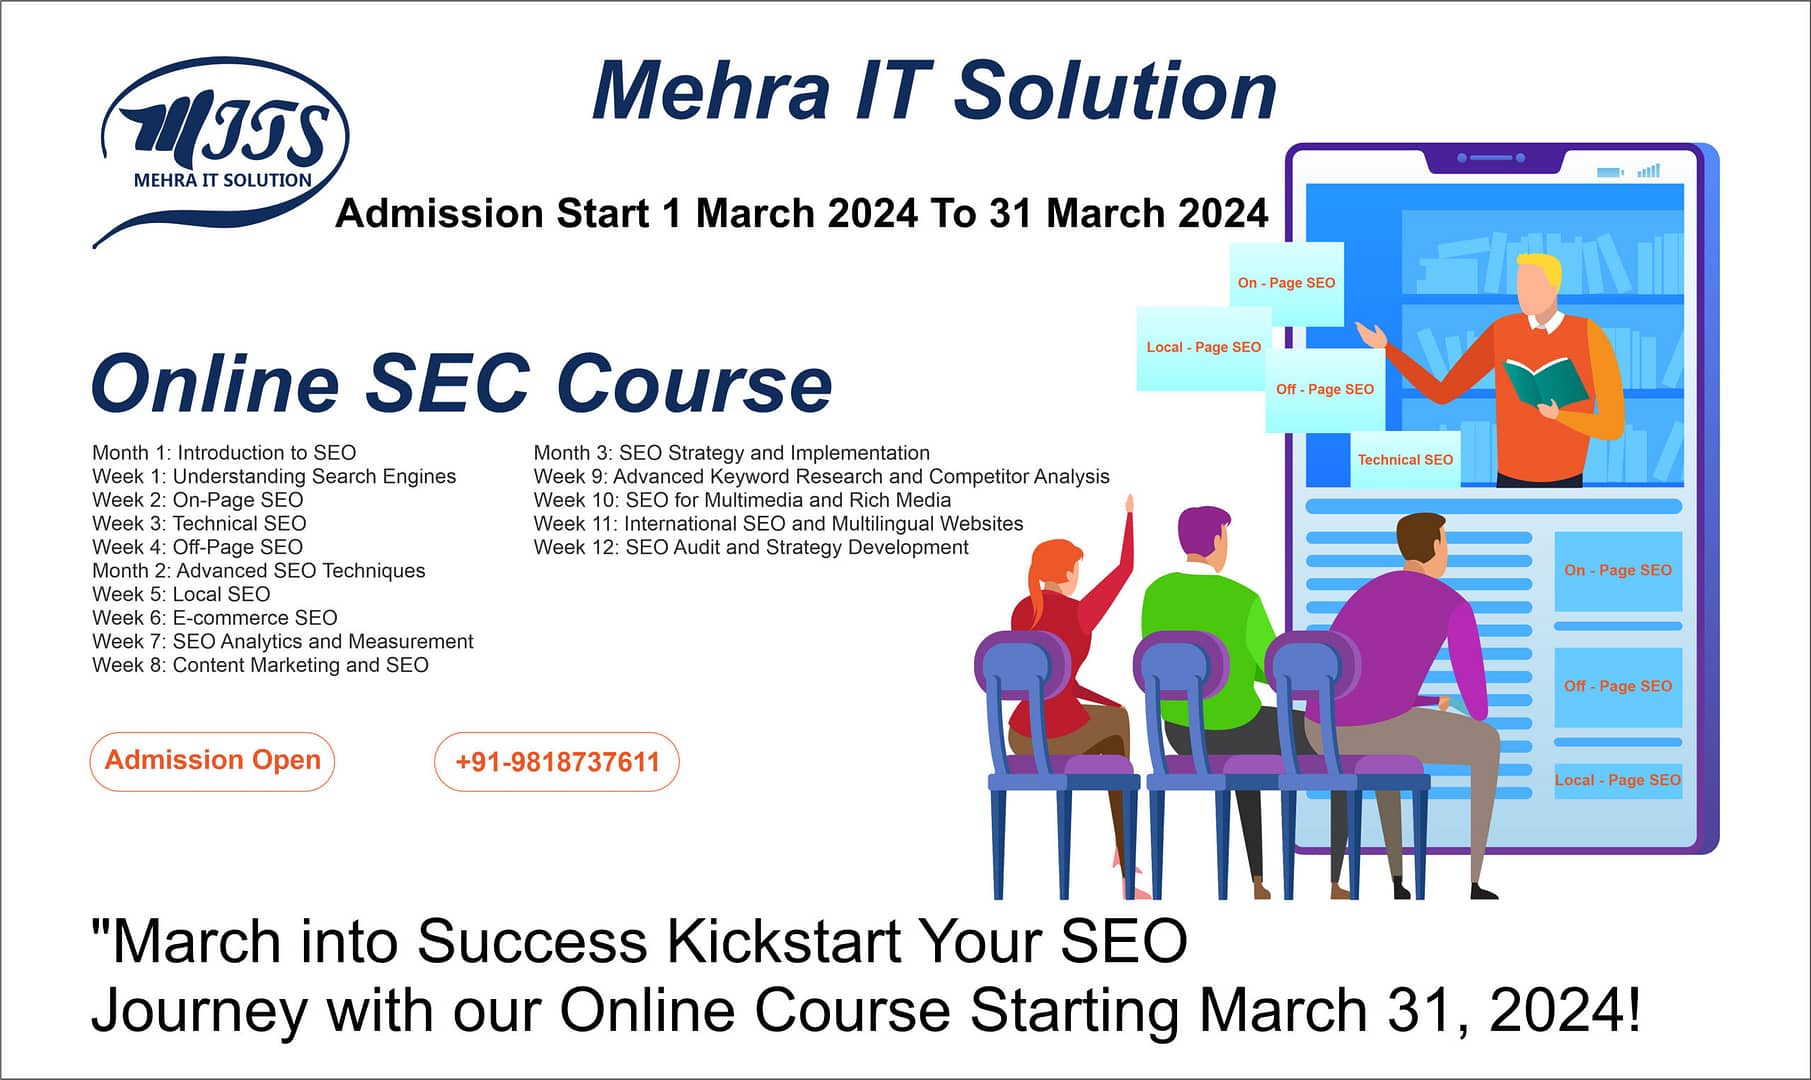 Online SEO Course Admission Open 1 March To 31 March 2024